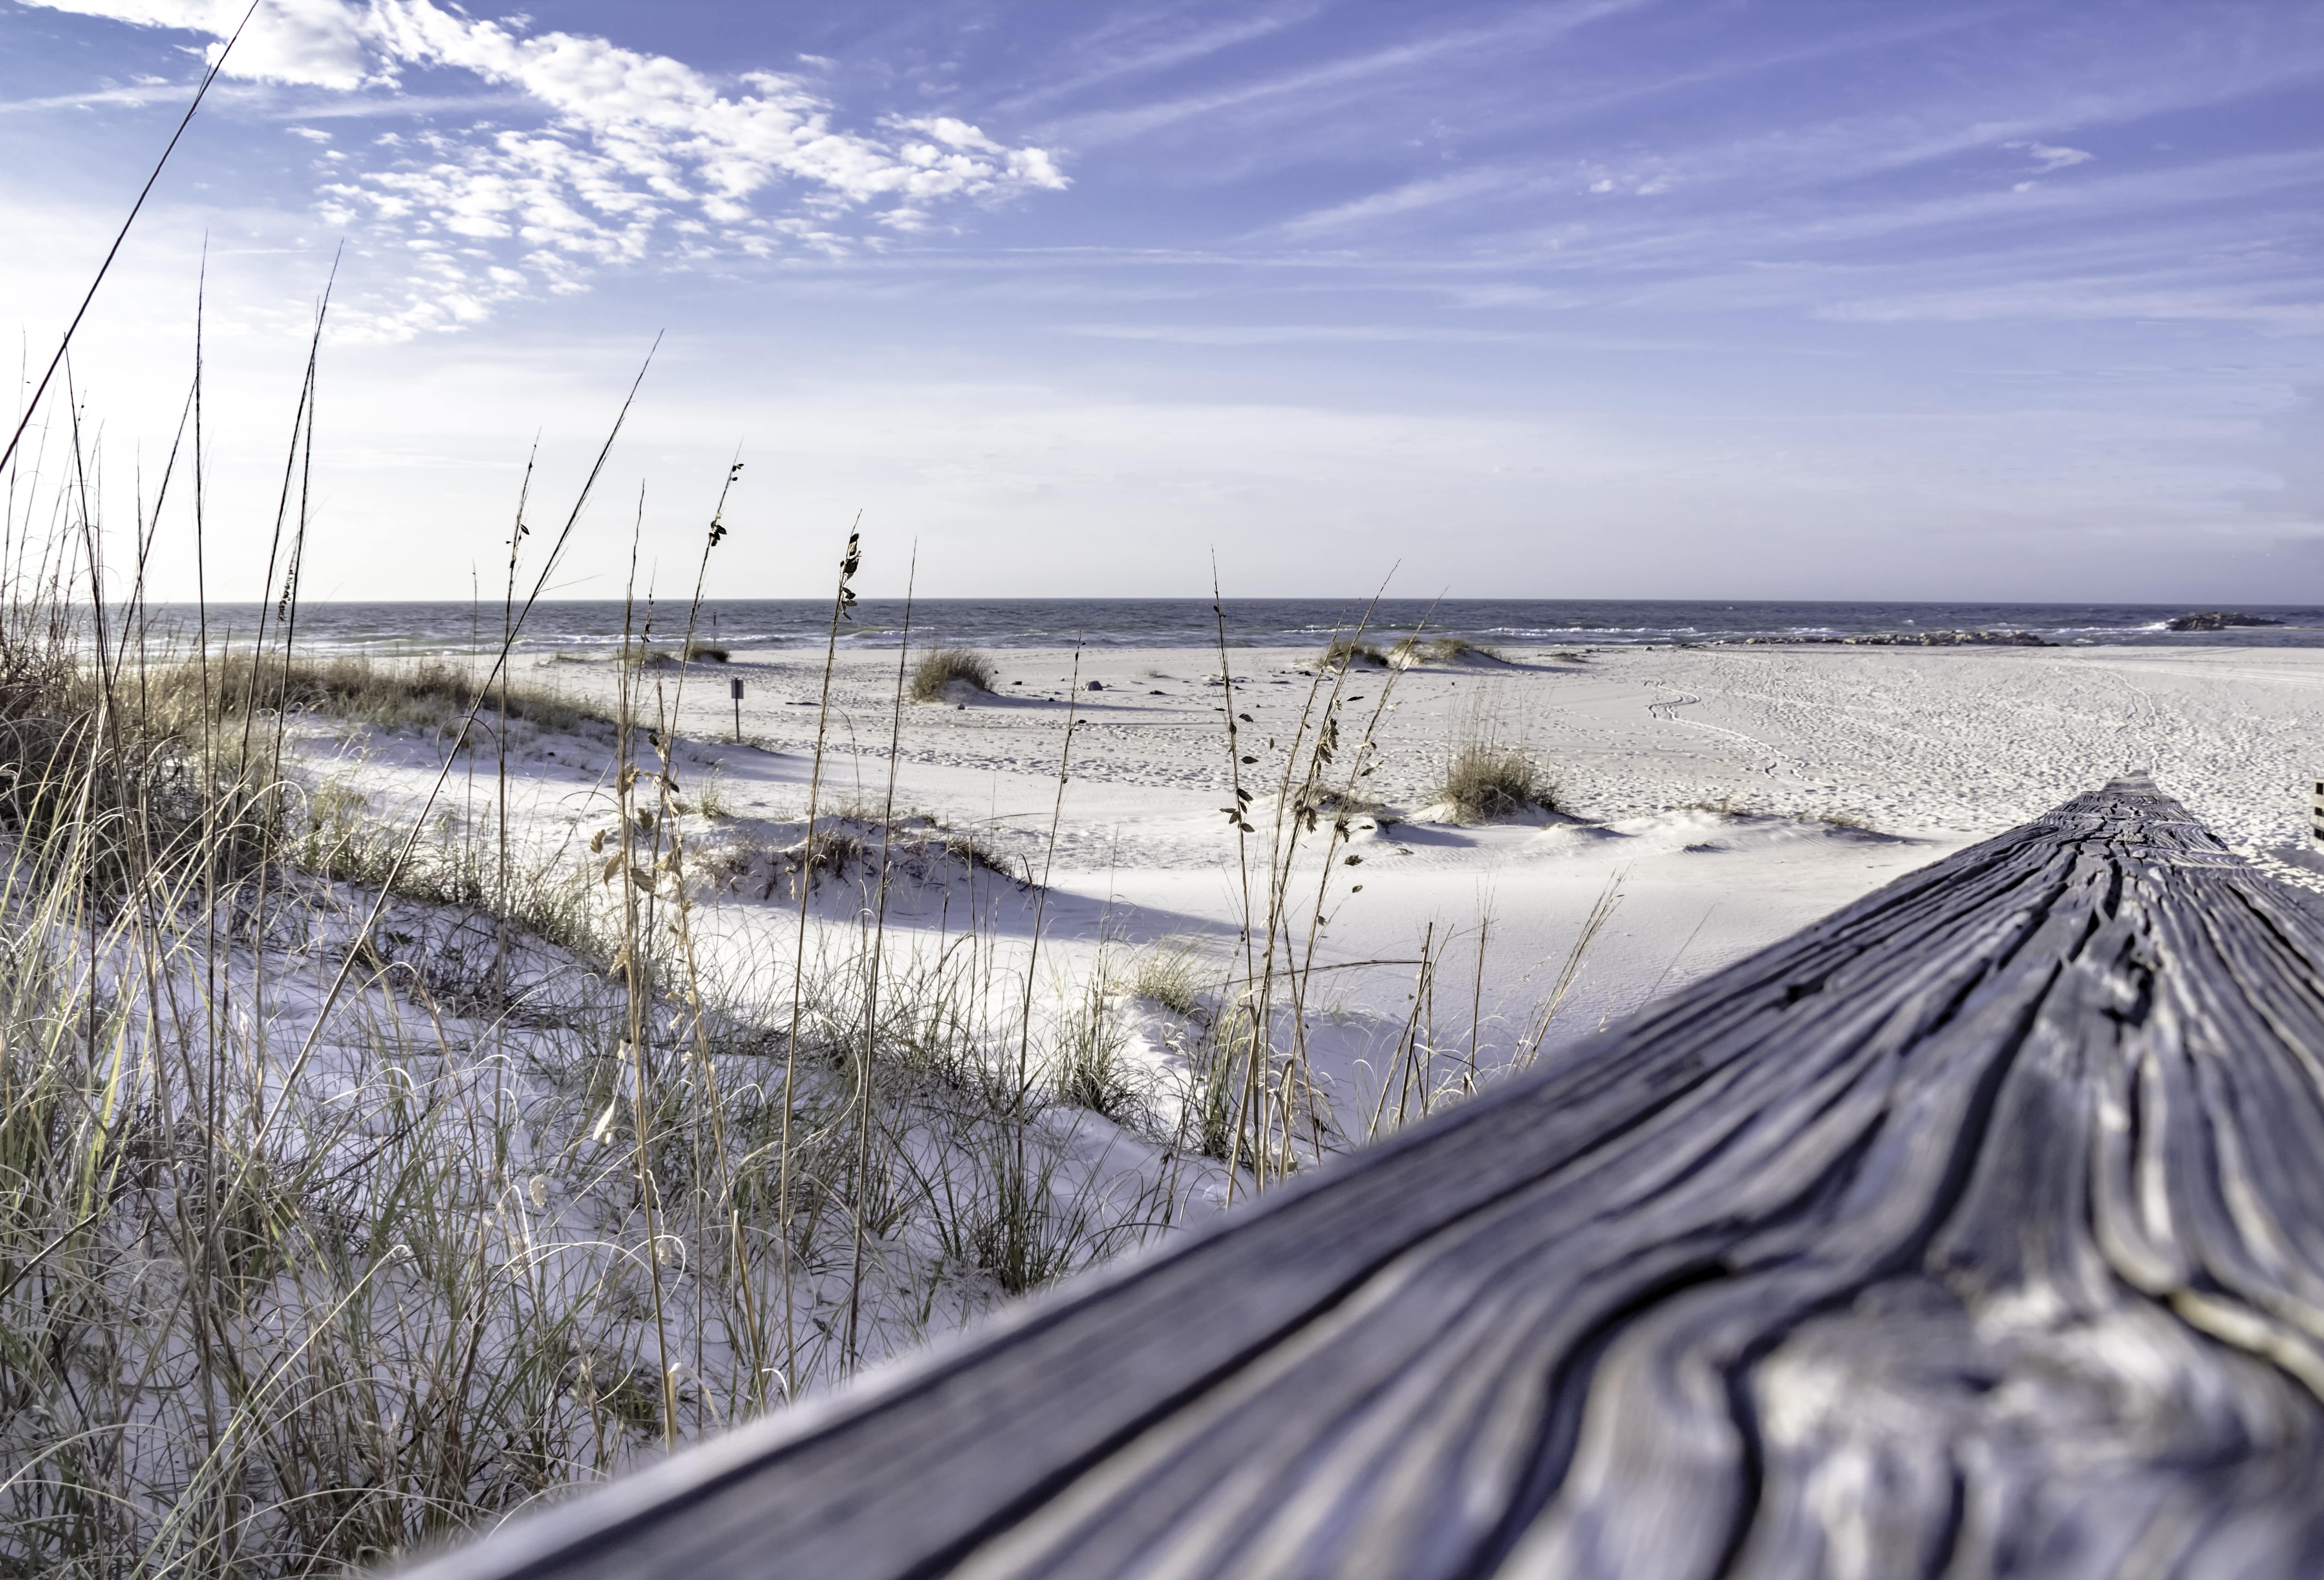 A grassy patch of sand kissed by rolling waves in Orange Beach